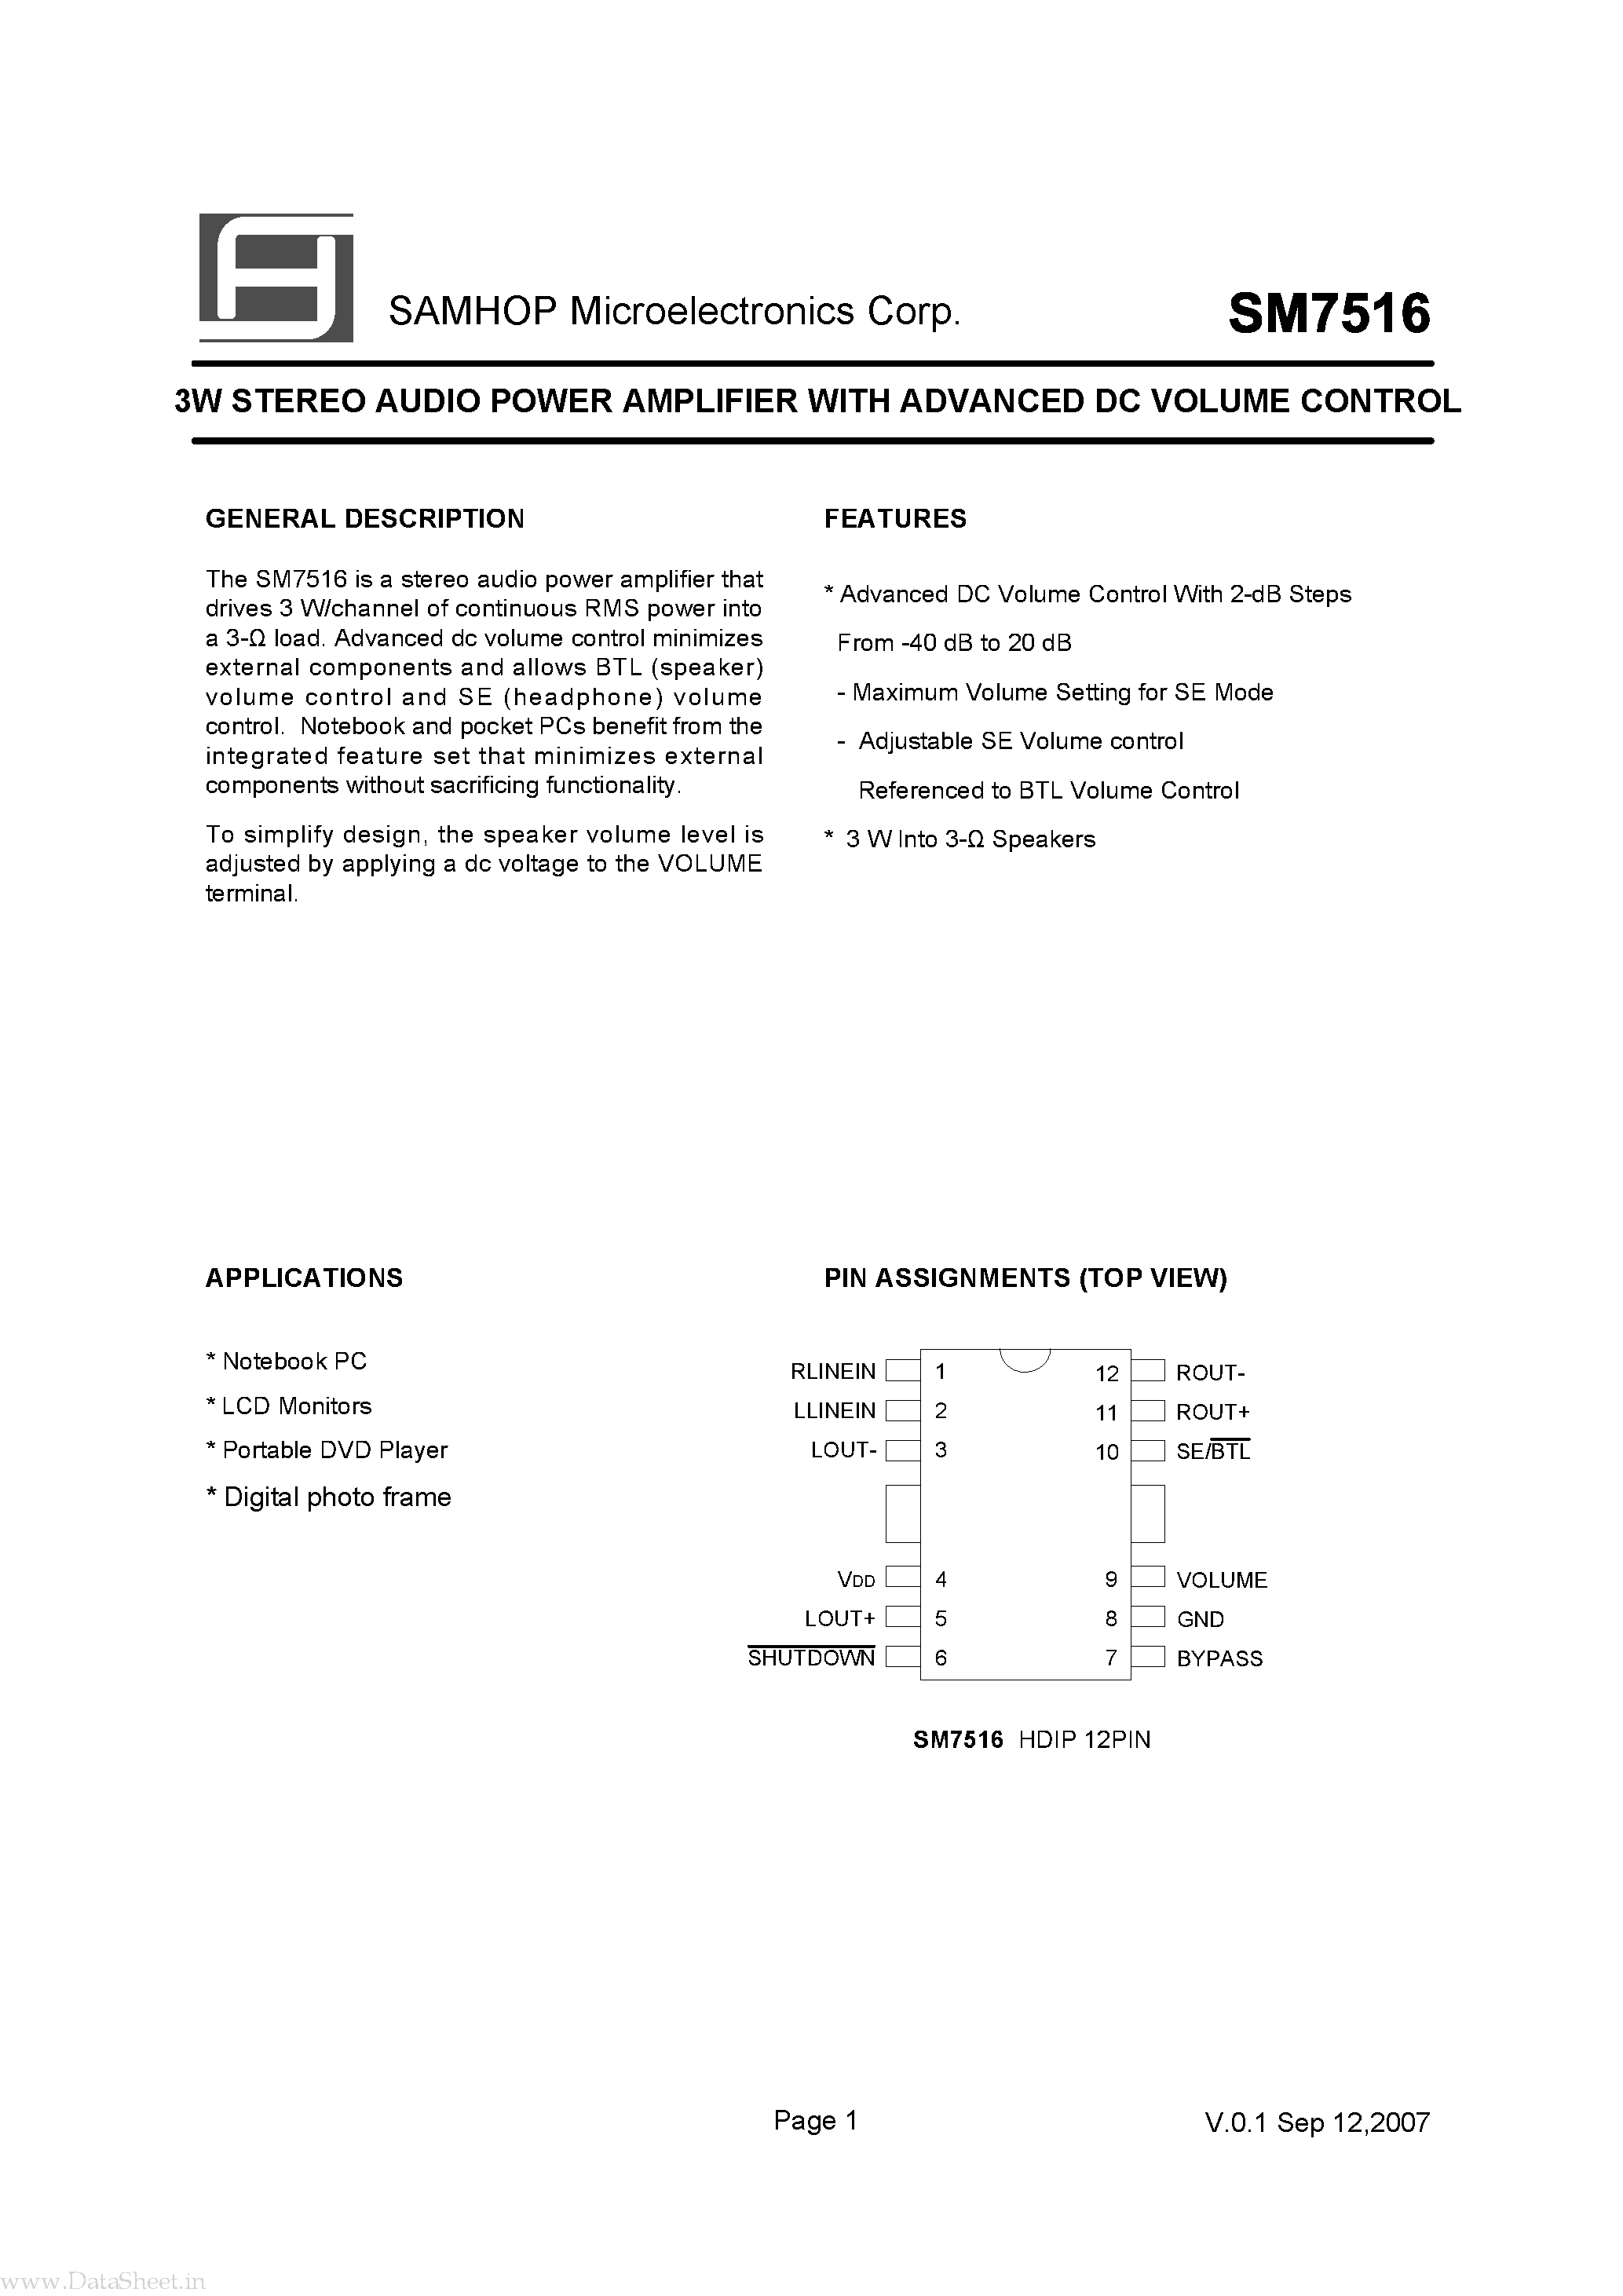 Datasheet SM7516 - 3W STEREO AUDIO POWER AMPLIFIER page 2